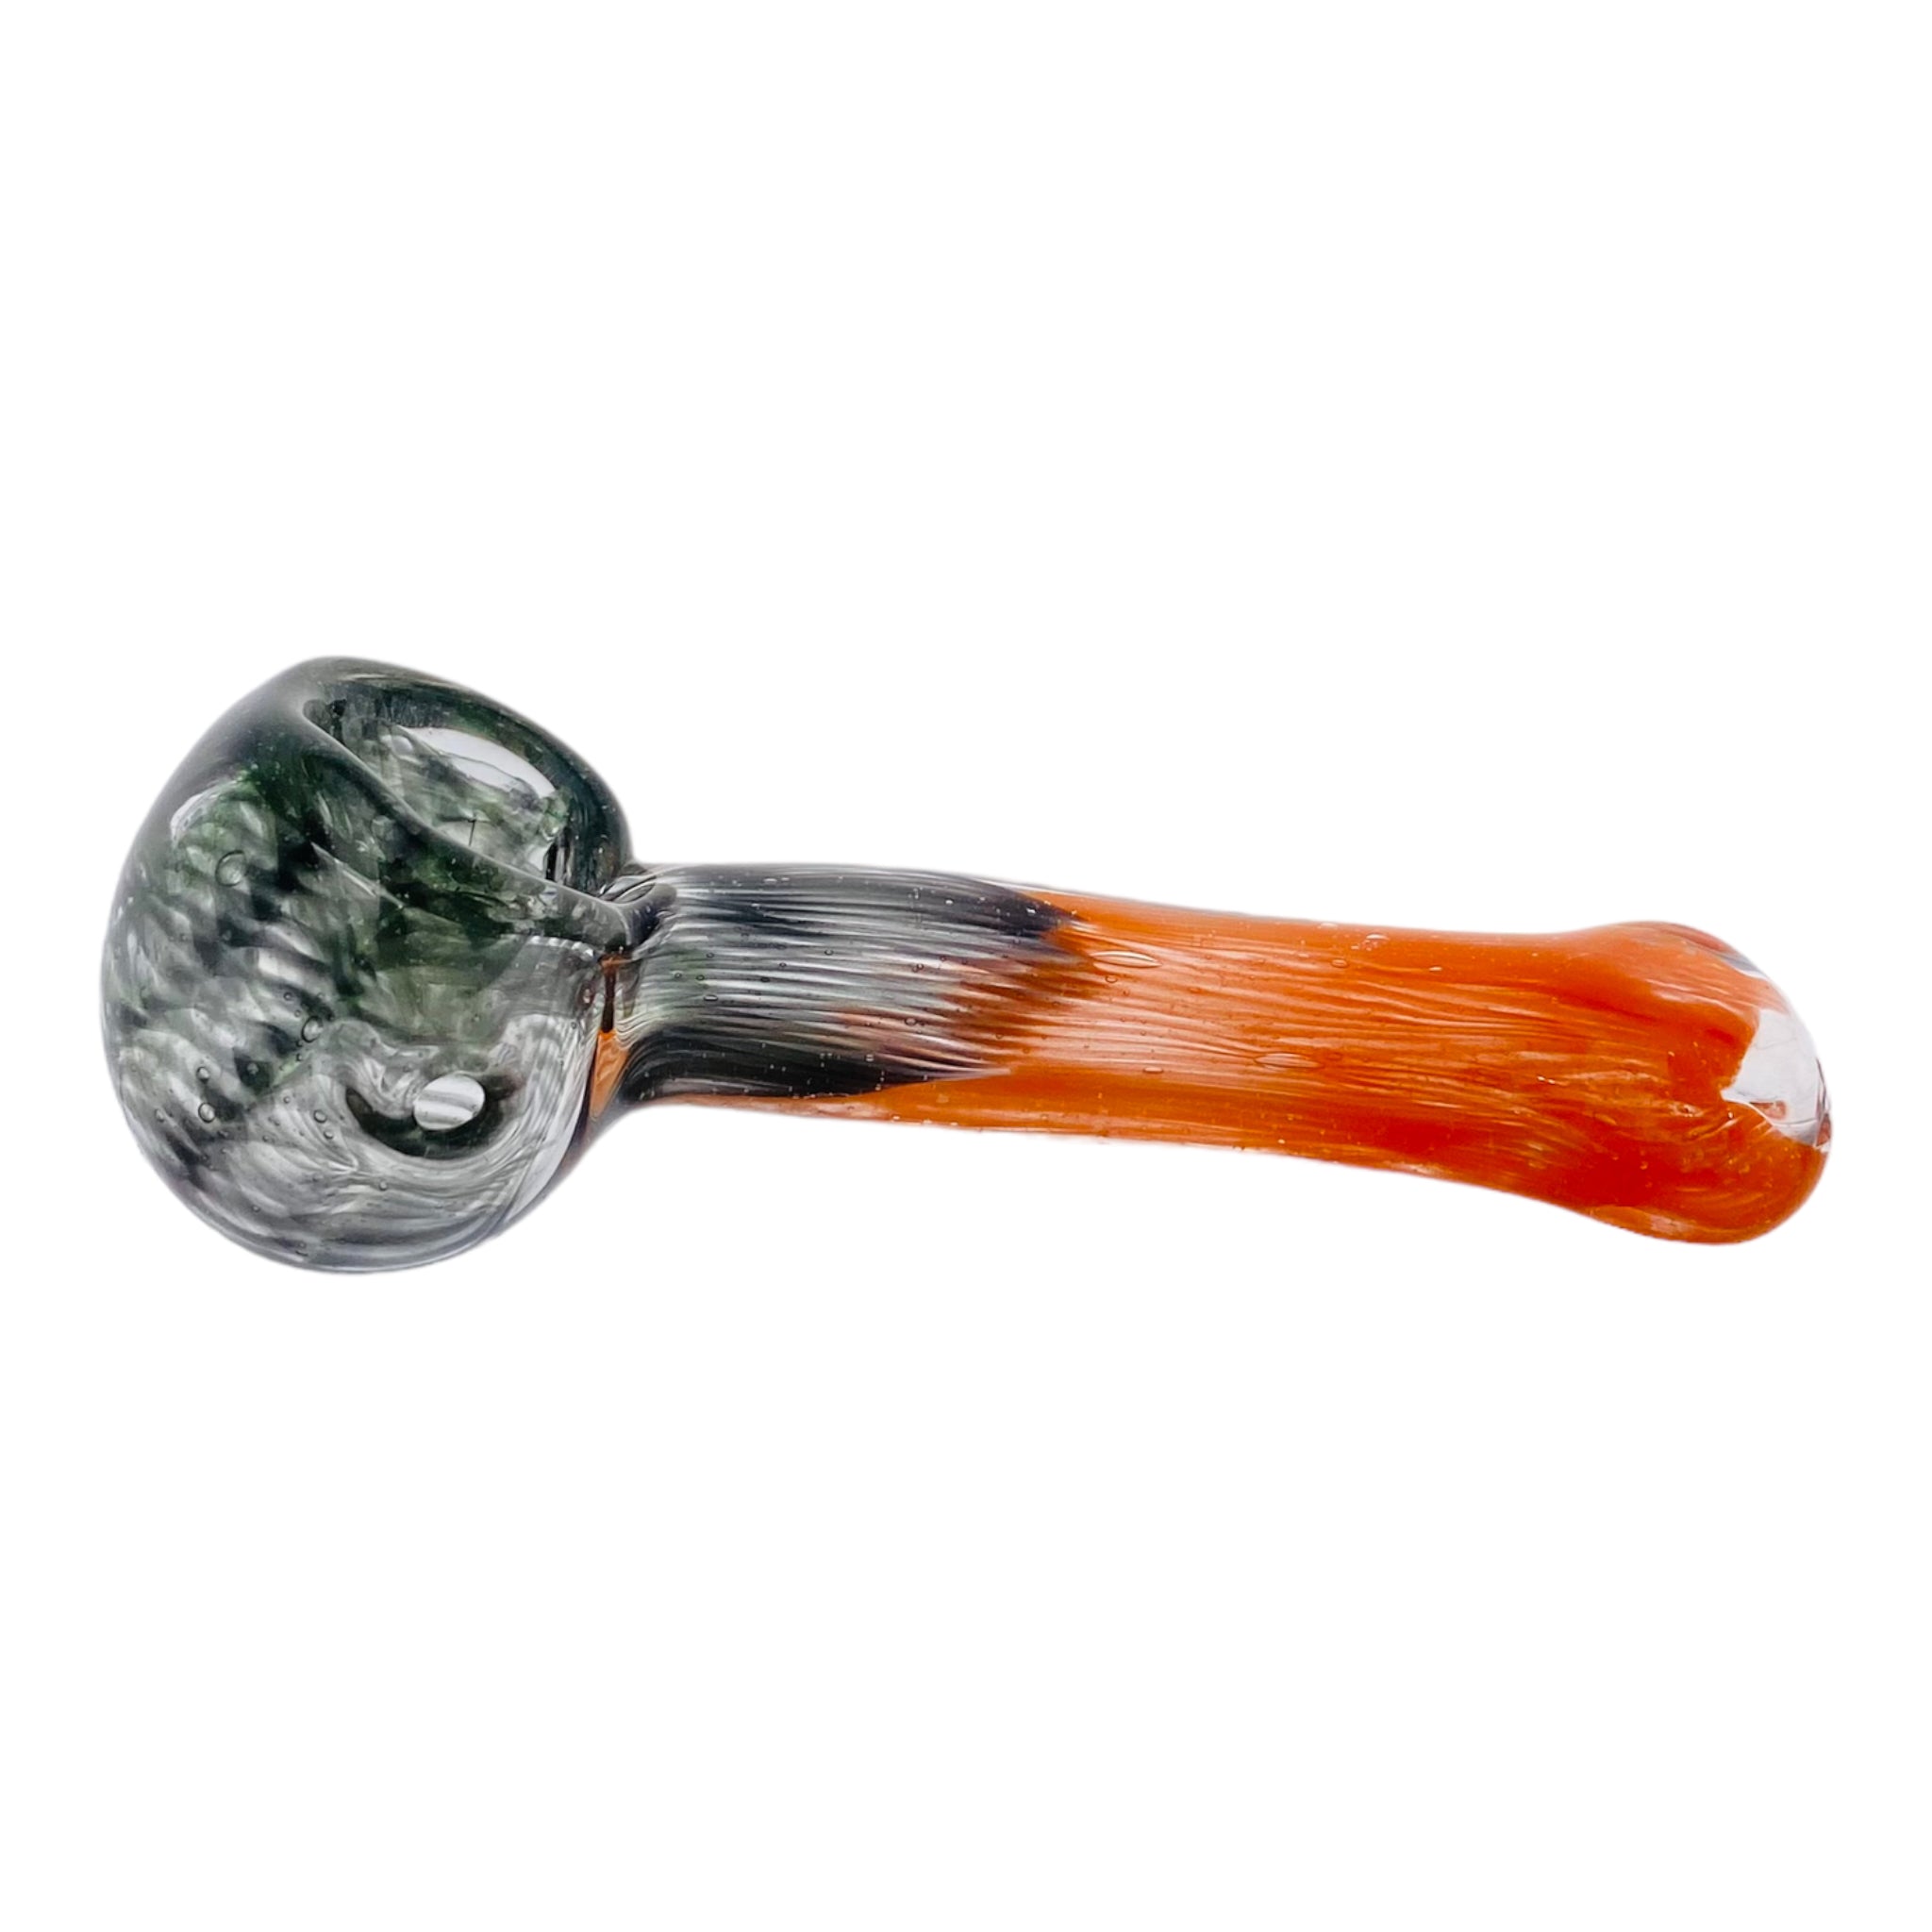 Basic Glass Spoon Pipe With Orange And Black Spiral Color Twist